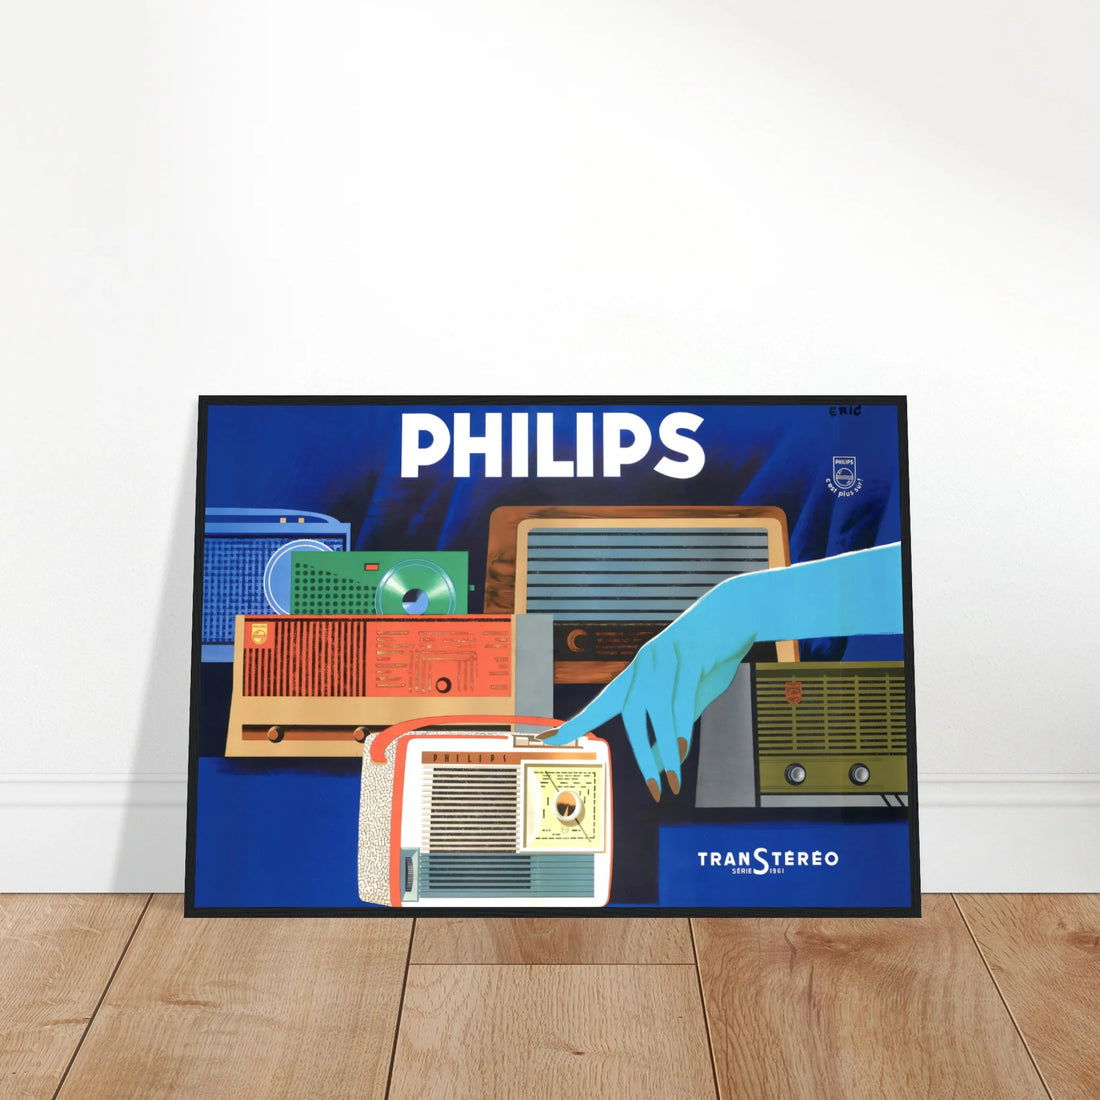 I want to go and buy a new Philips Radio now!